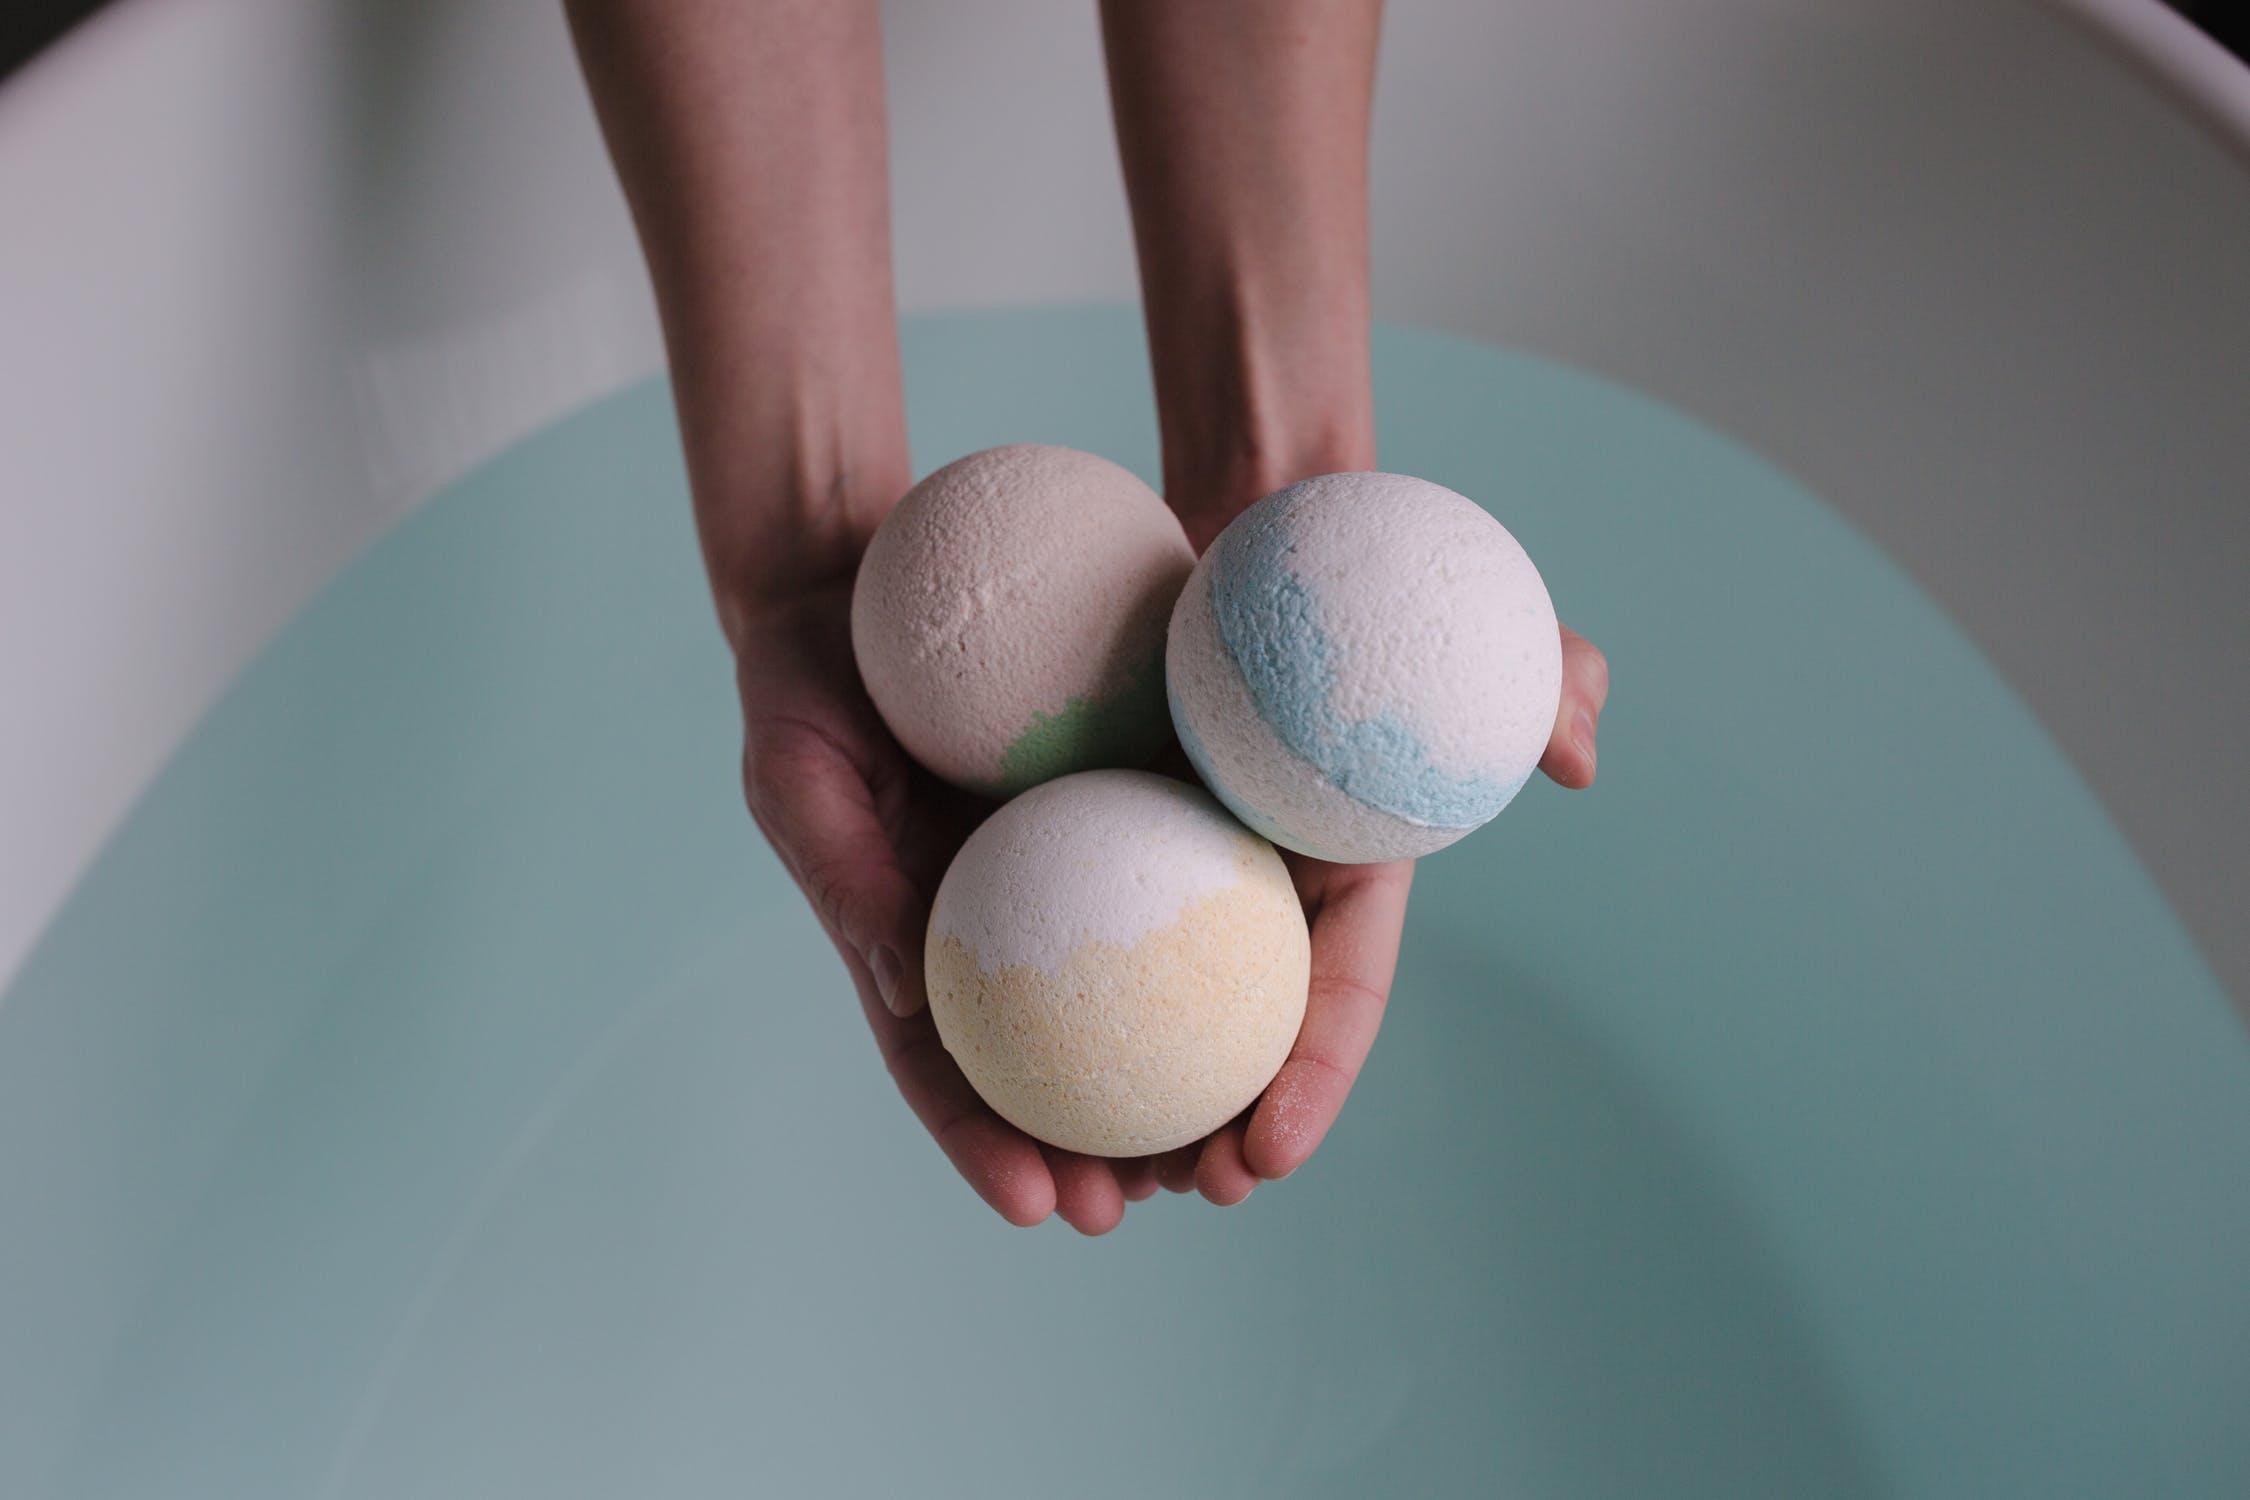 How to make bath bombs | Popular Science